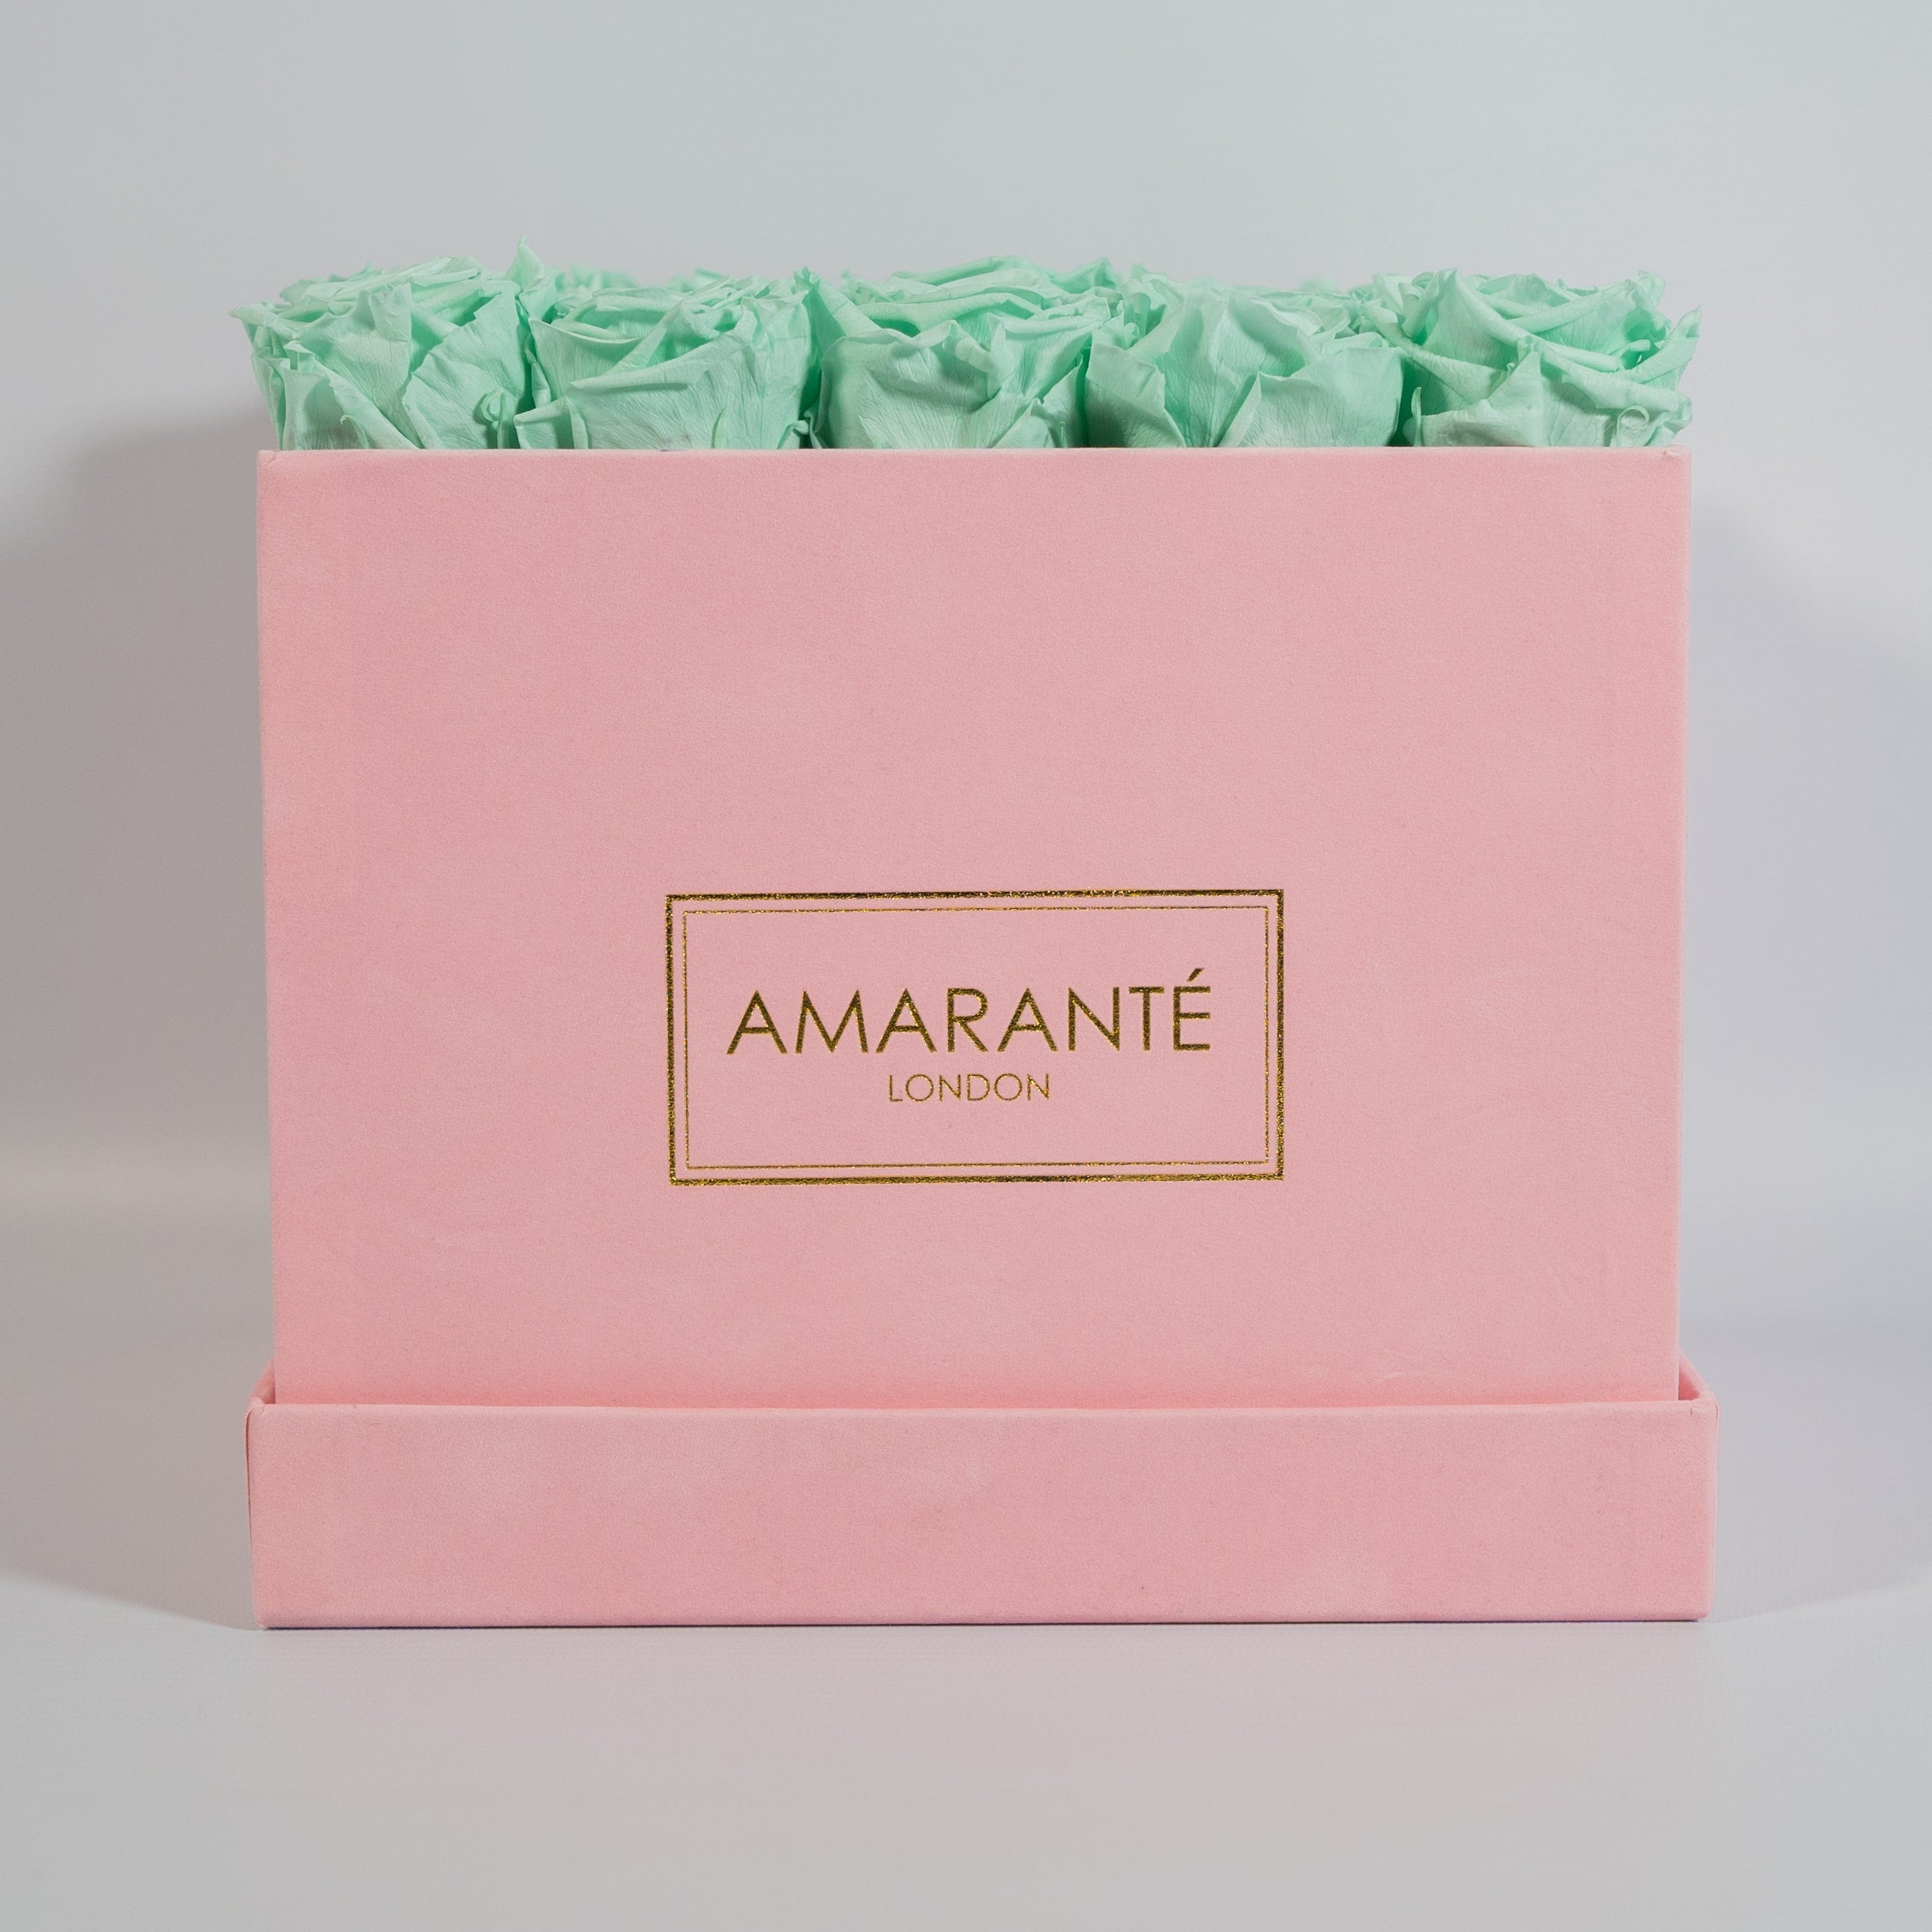 Earth toned mint green roses shown in a sleek pink box 